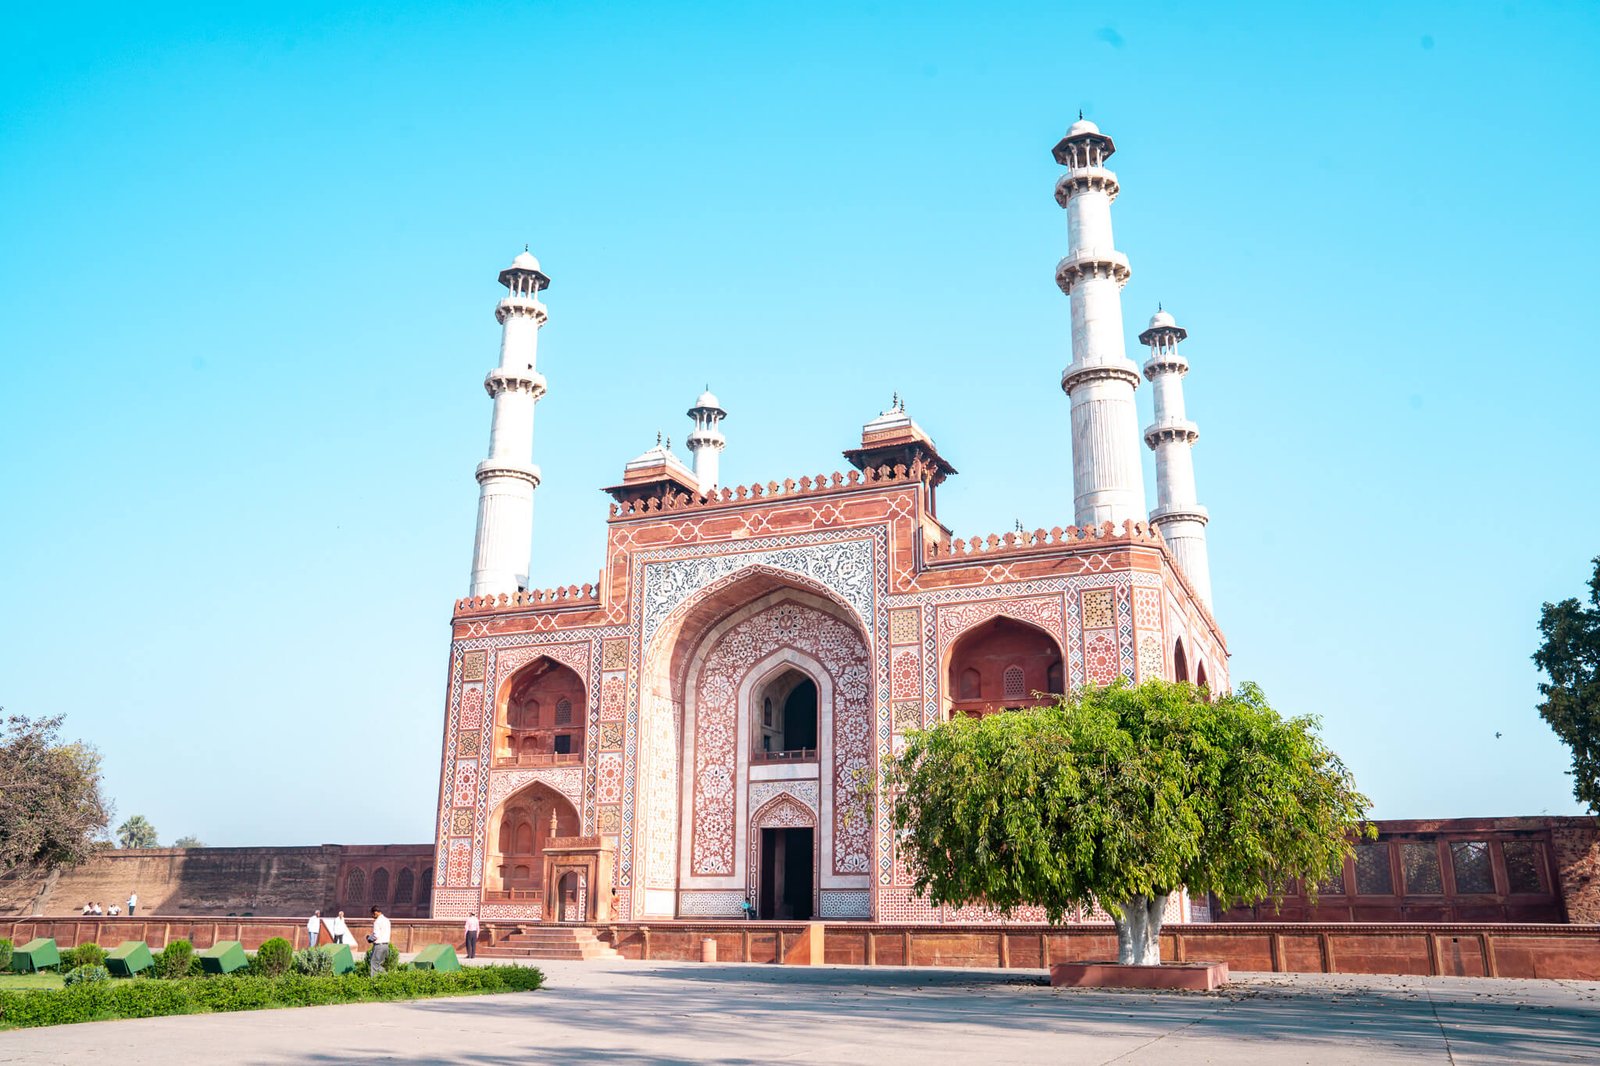 Tomb of Akbar, things to do in the city of Agra. India